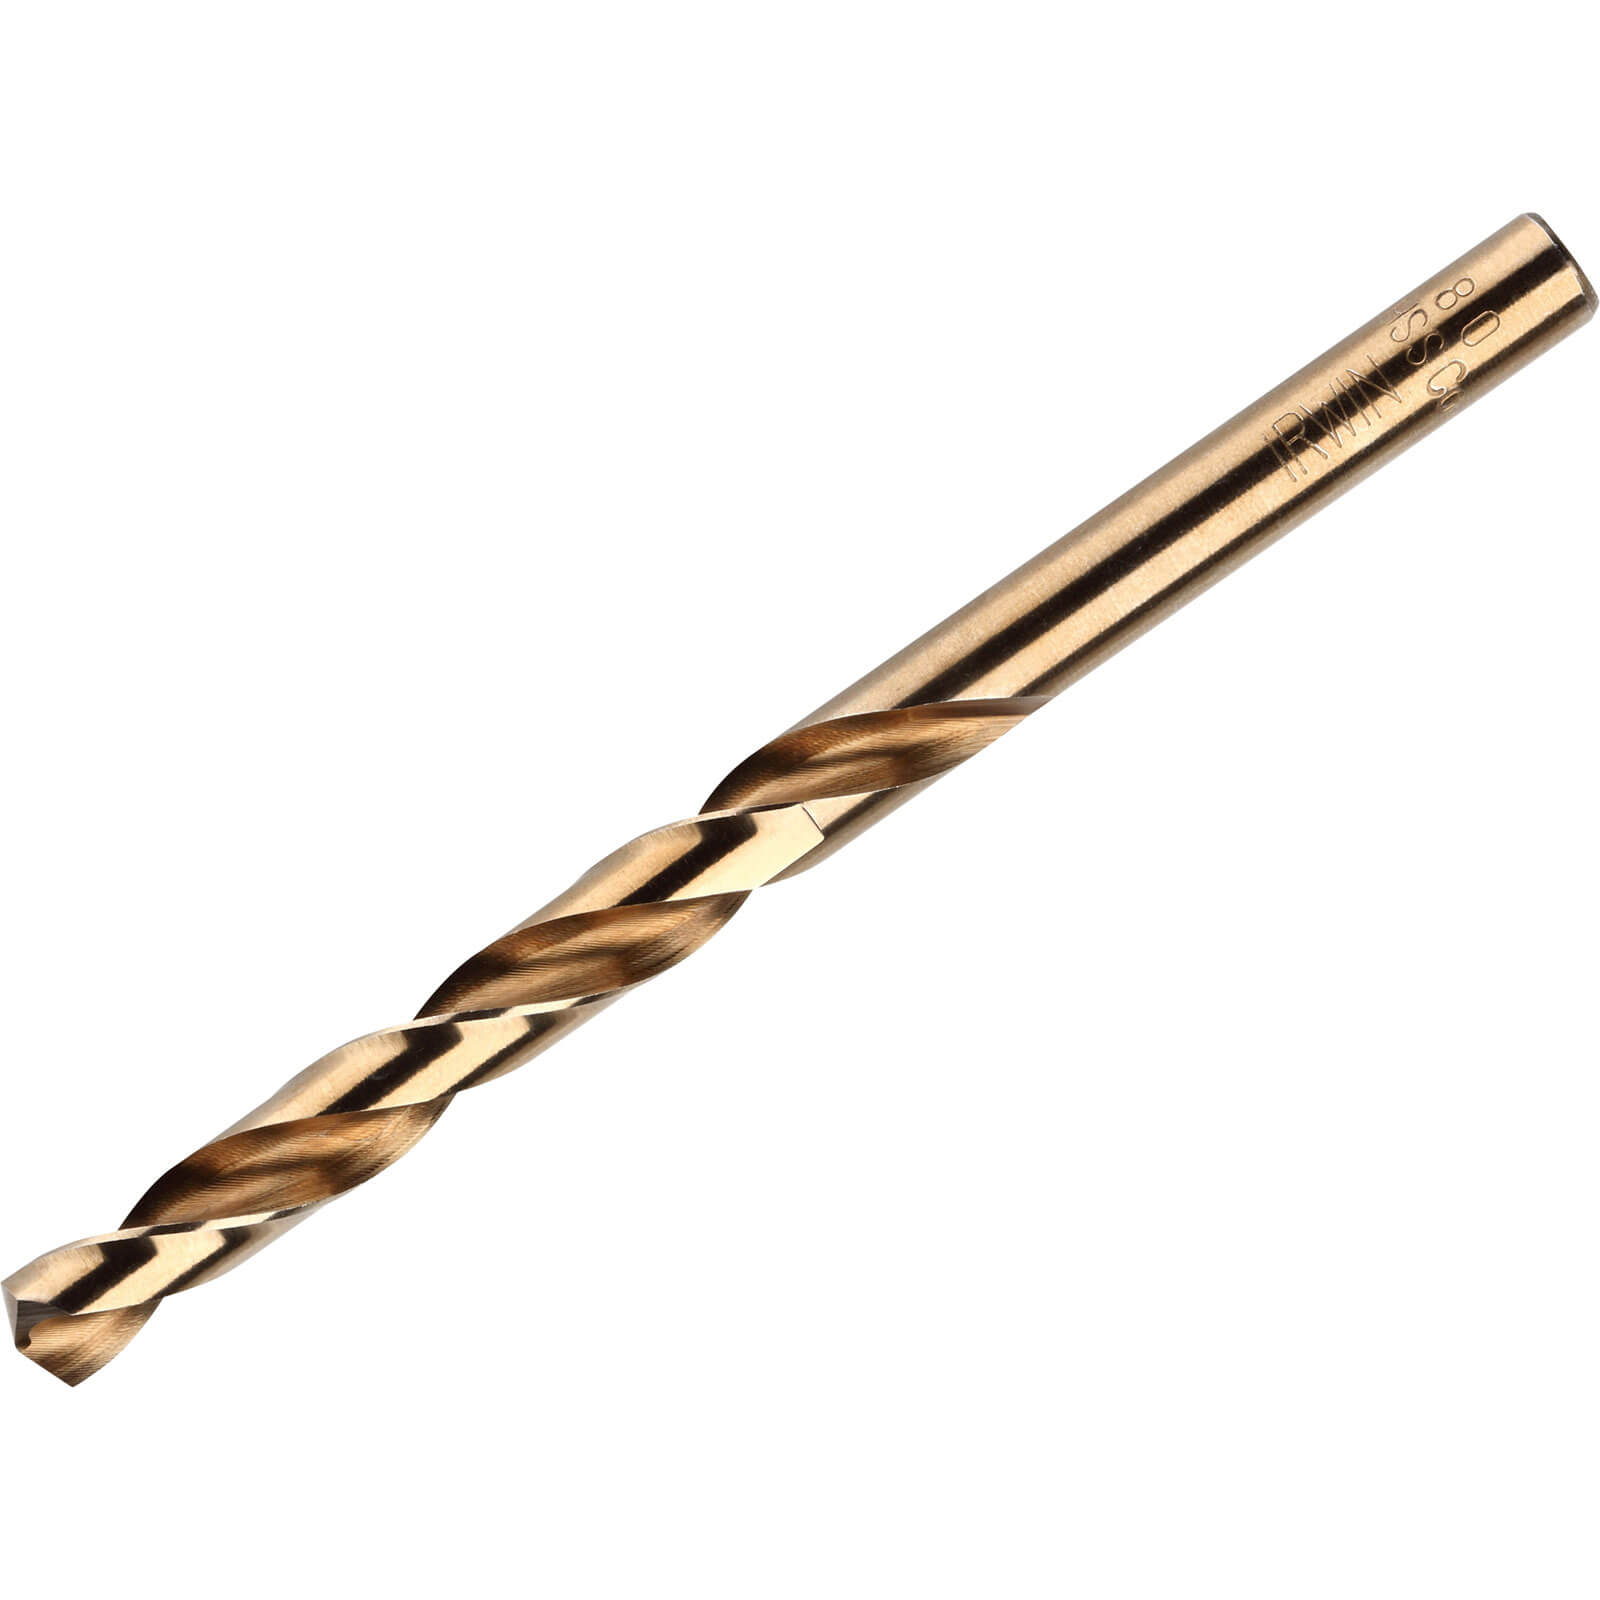 Image of Irwin HSS Cobalt Drill Bit for Metal 13mm Pack of 5